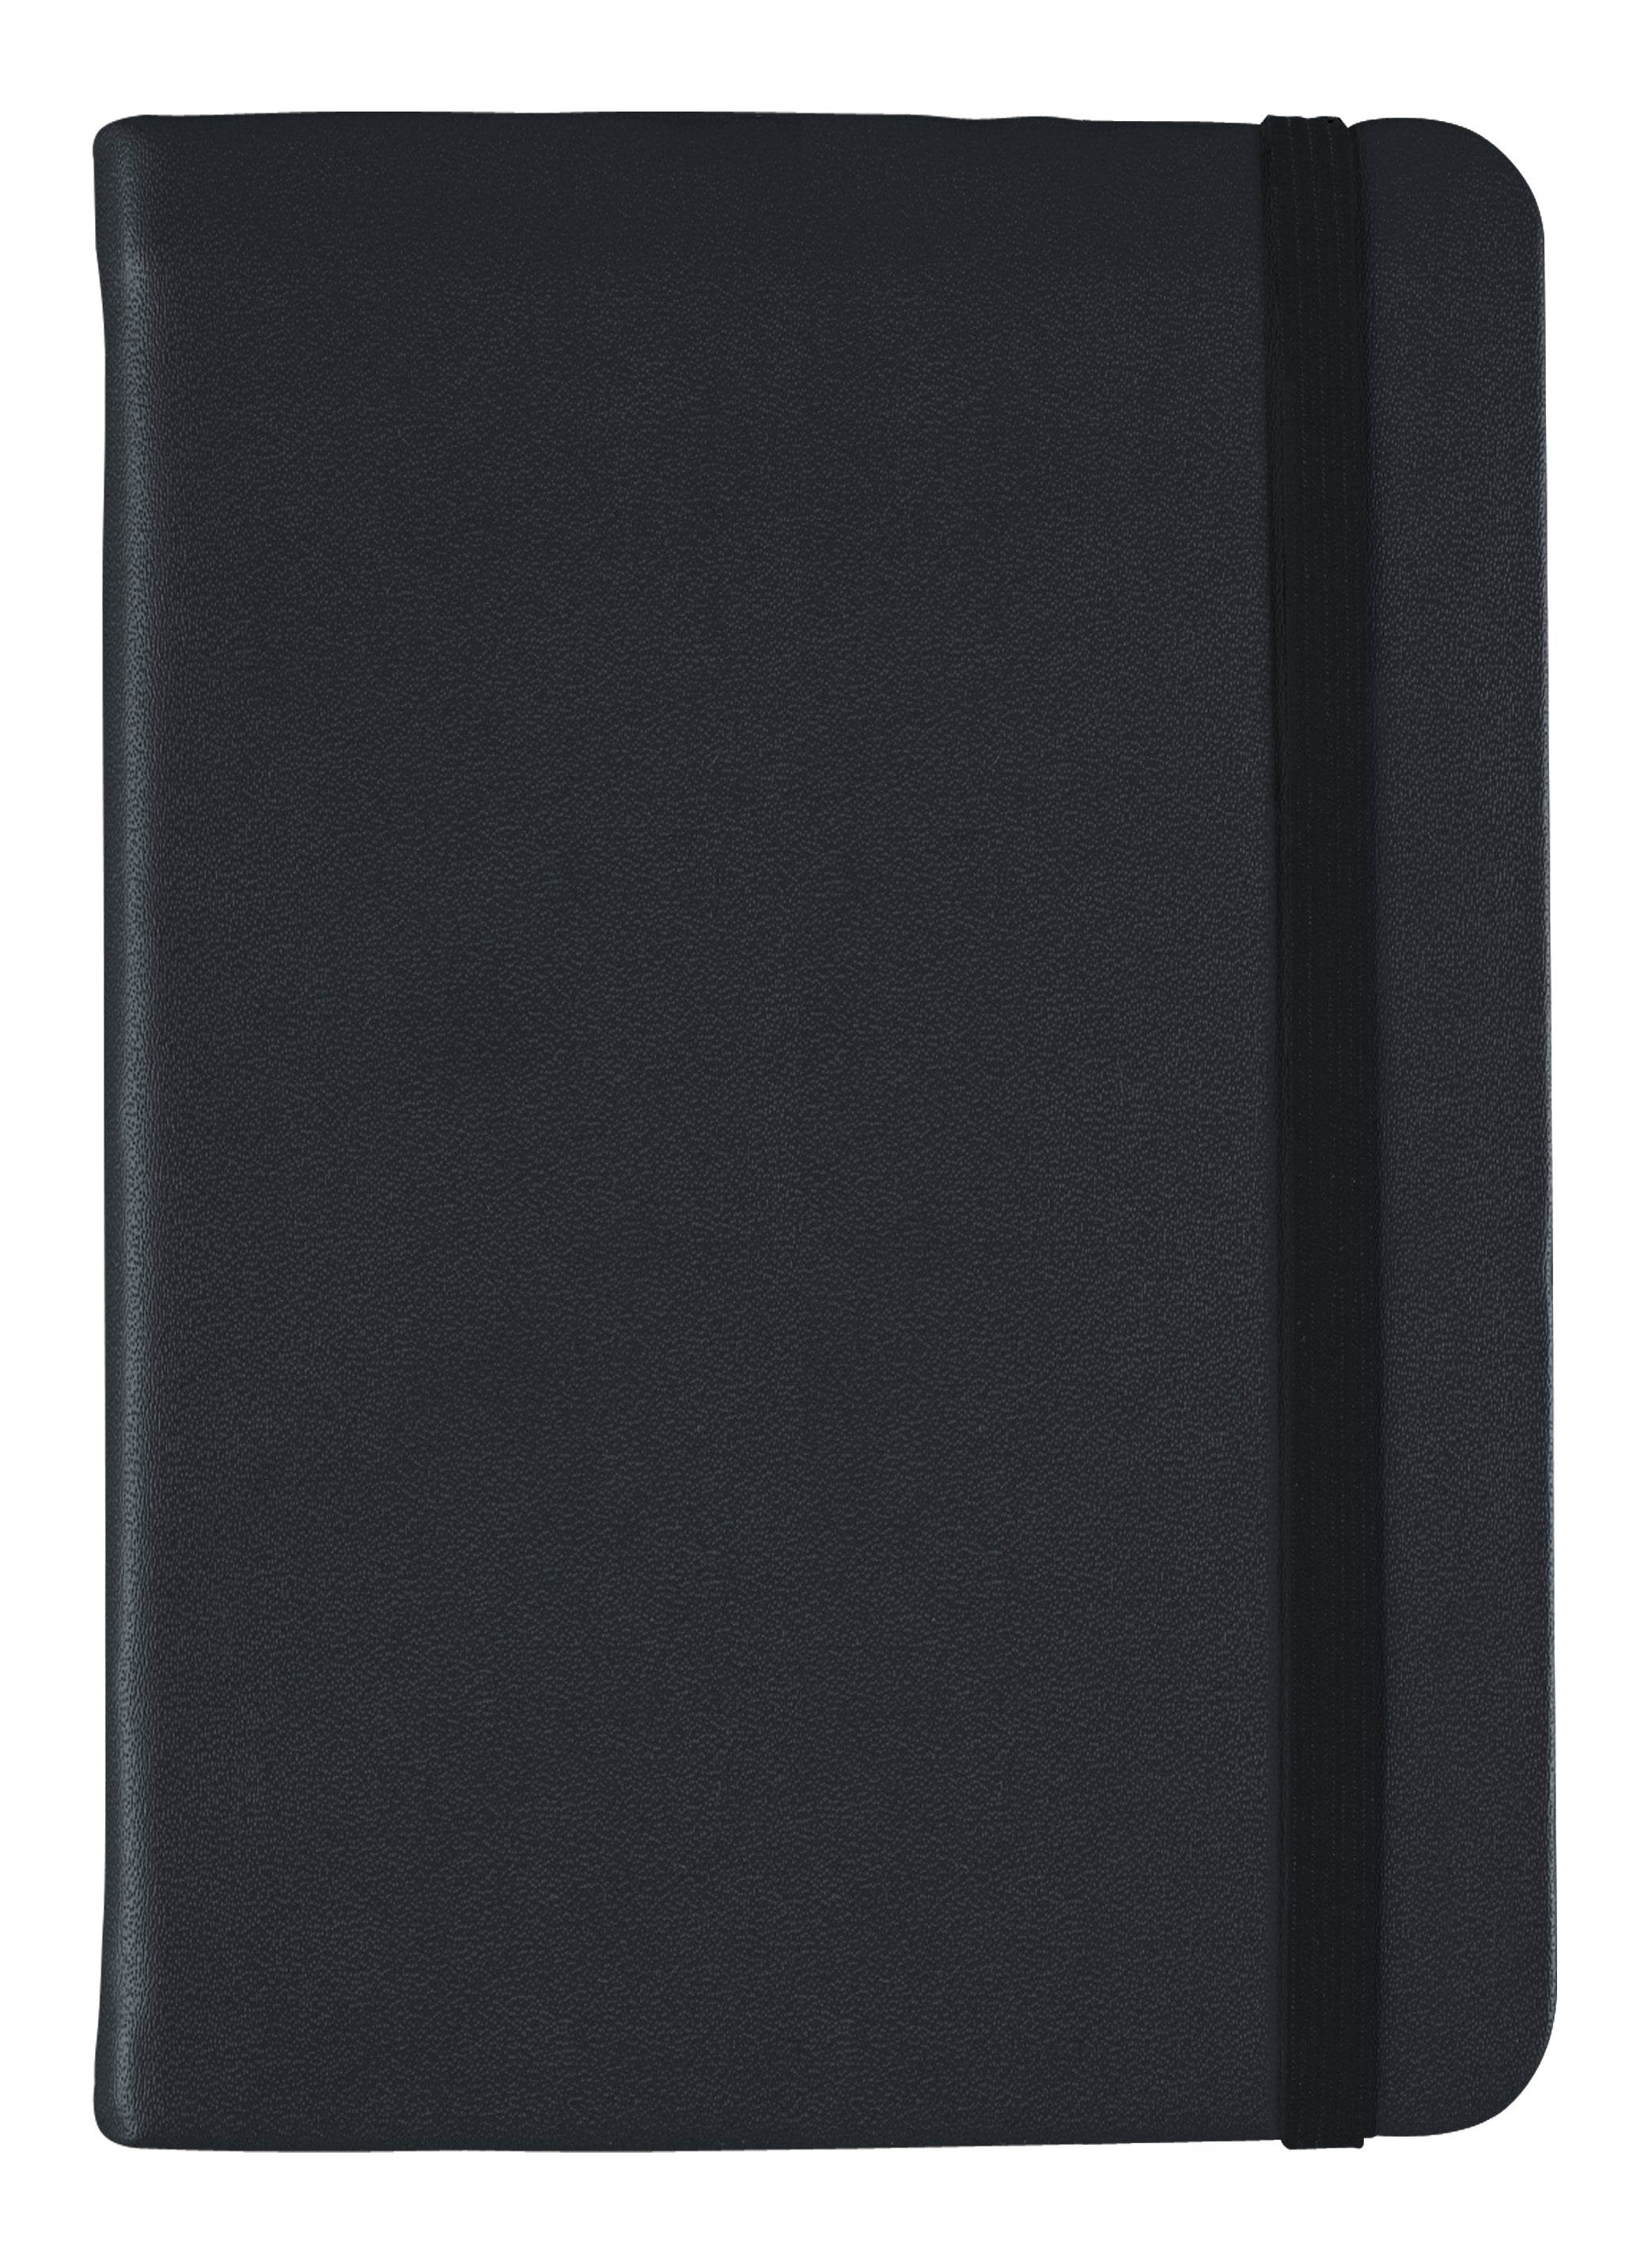 Collins Vauxhall Journal - 192 Blank Pages, Size Quarto